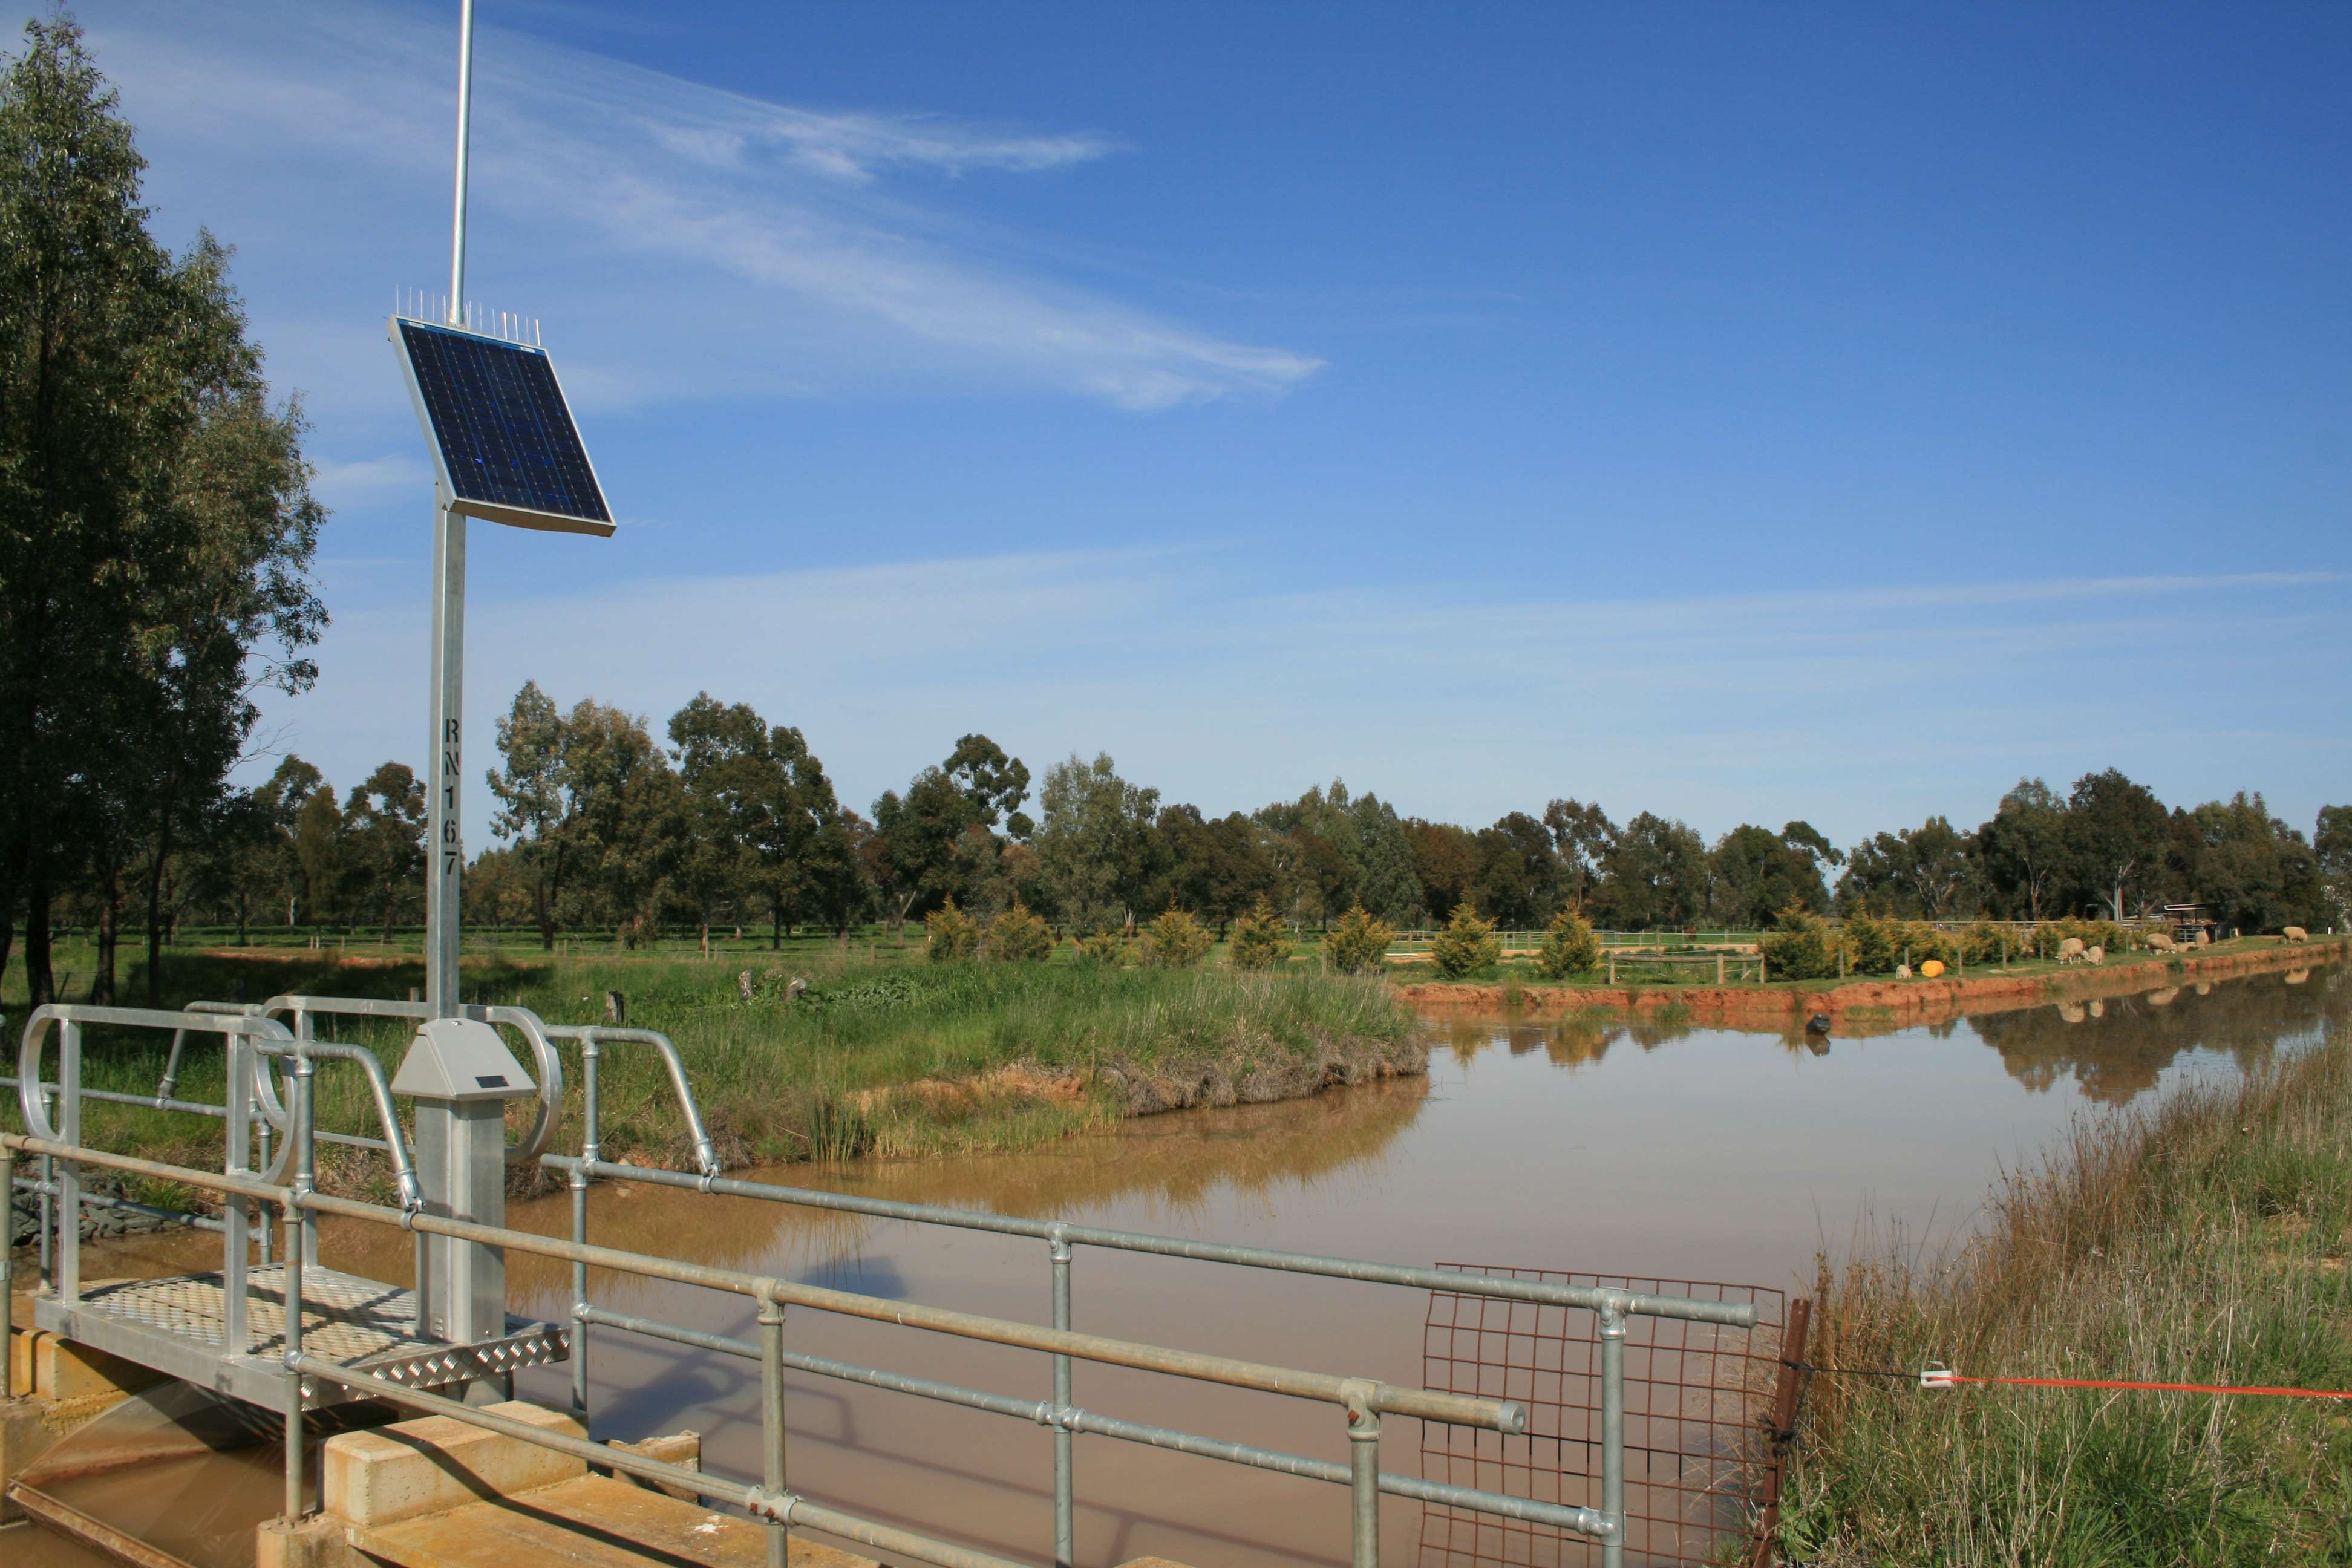 A monitoring station on a channel